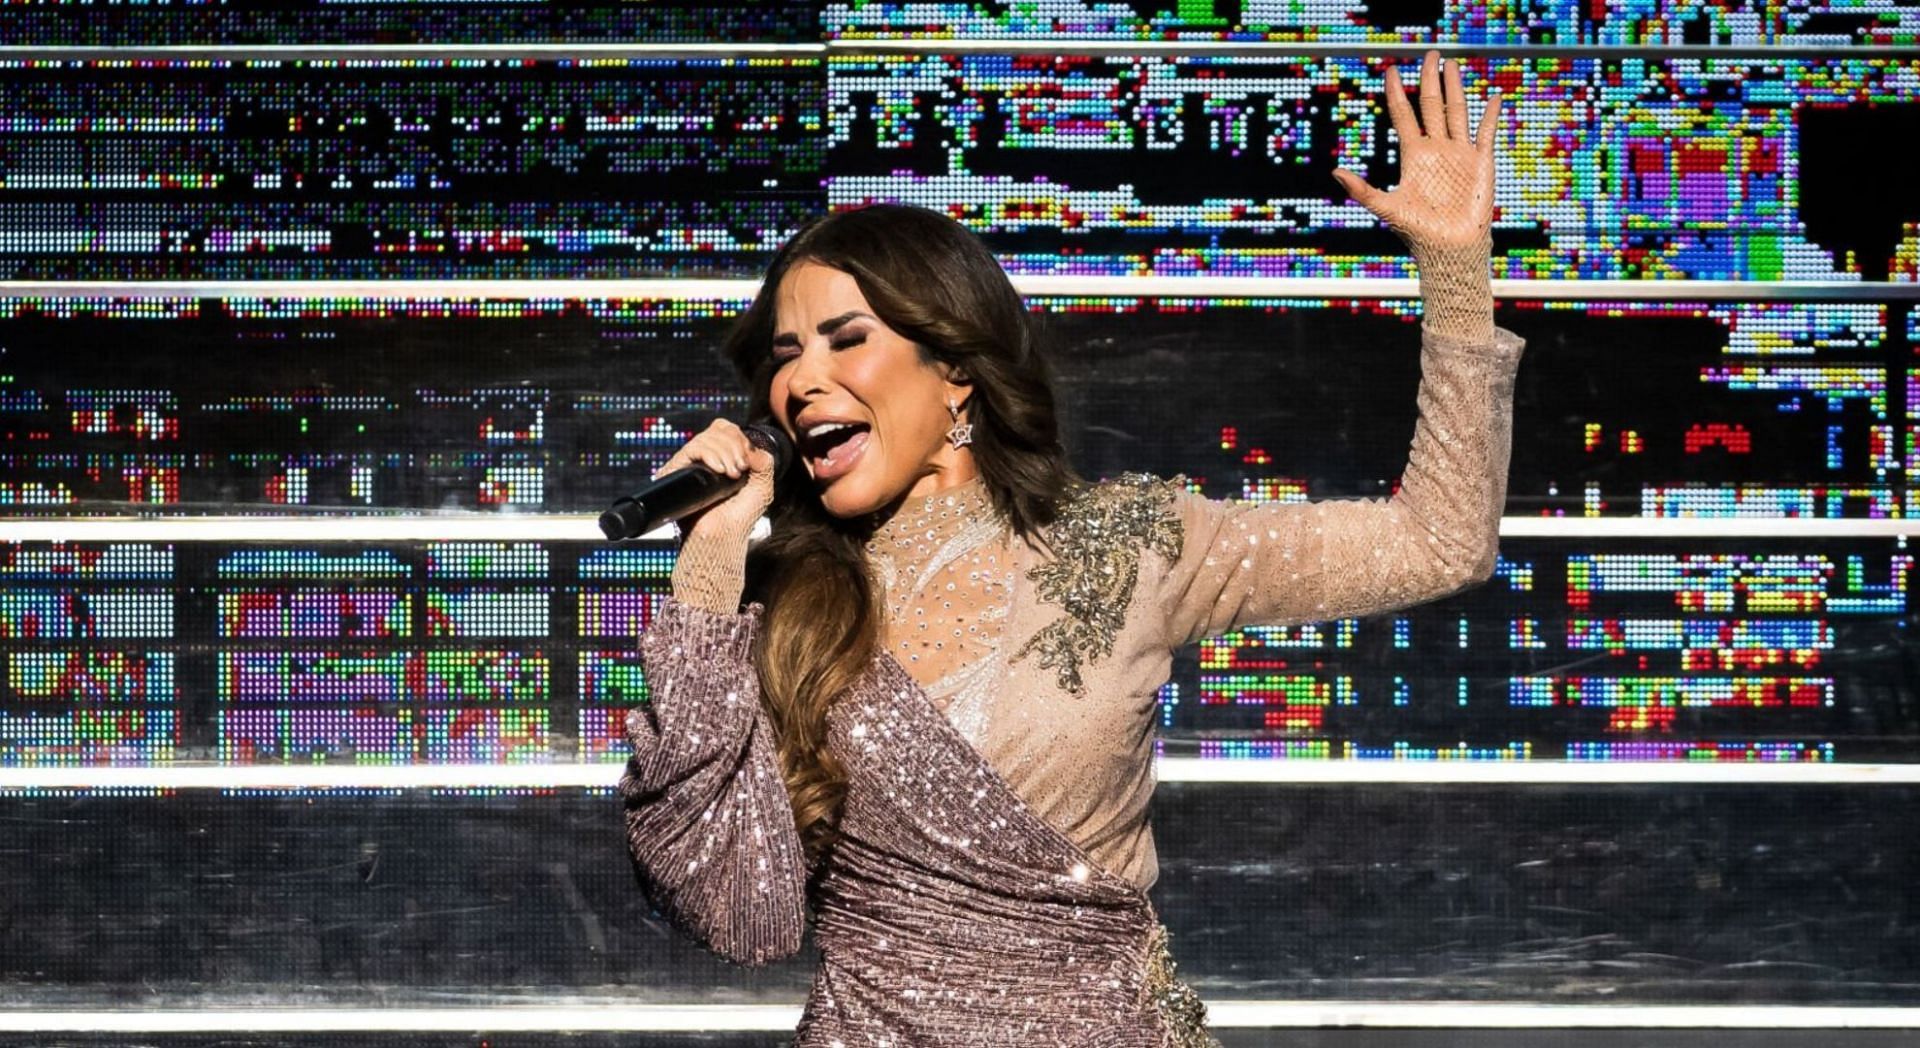 Mexican pop singer Gloria Trevi is facing a civil lawsuit over allegations of grooming minors in the 90s (Image via Getty Images)